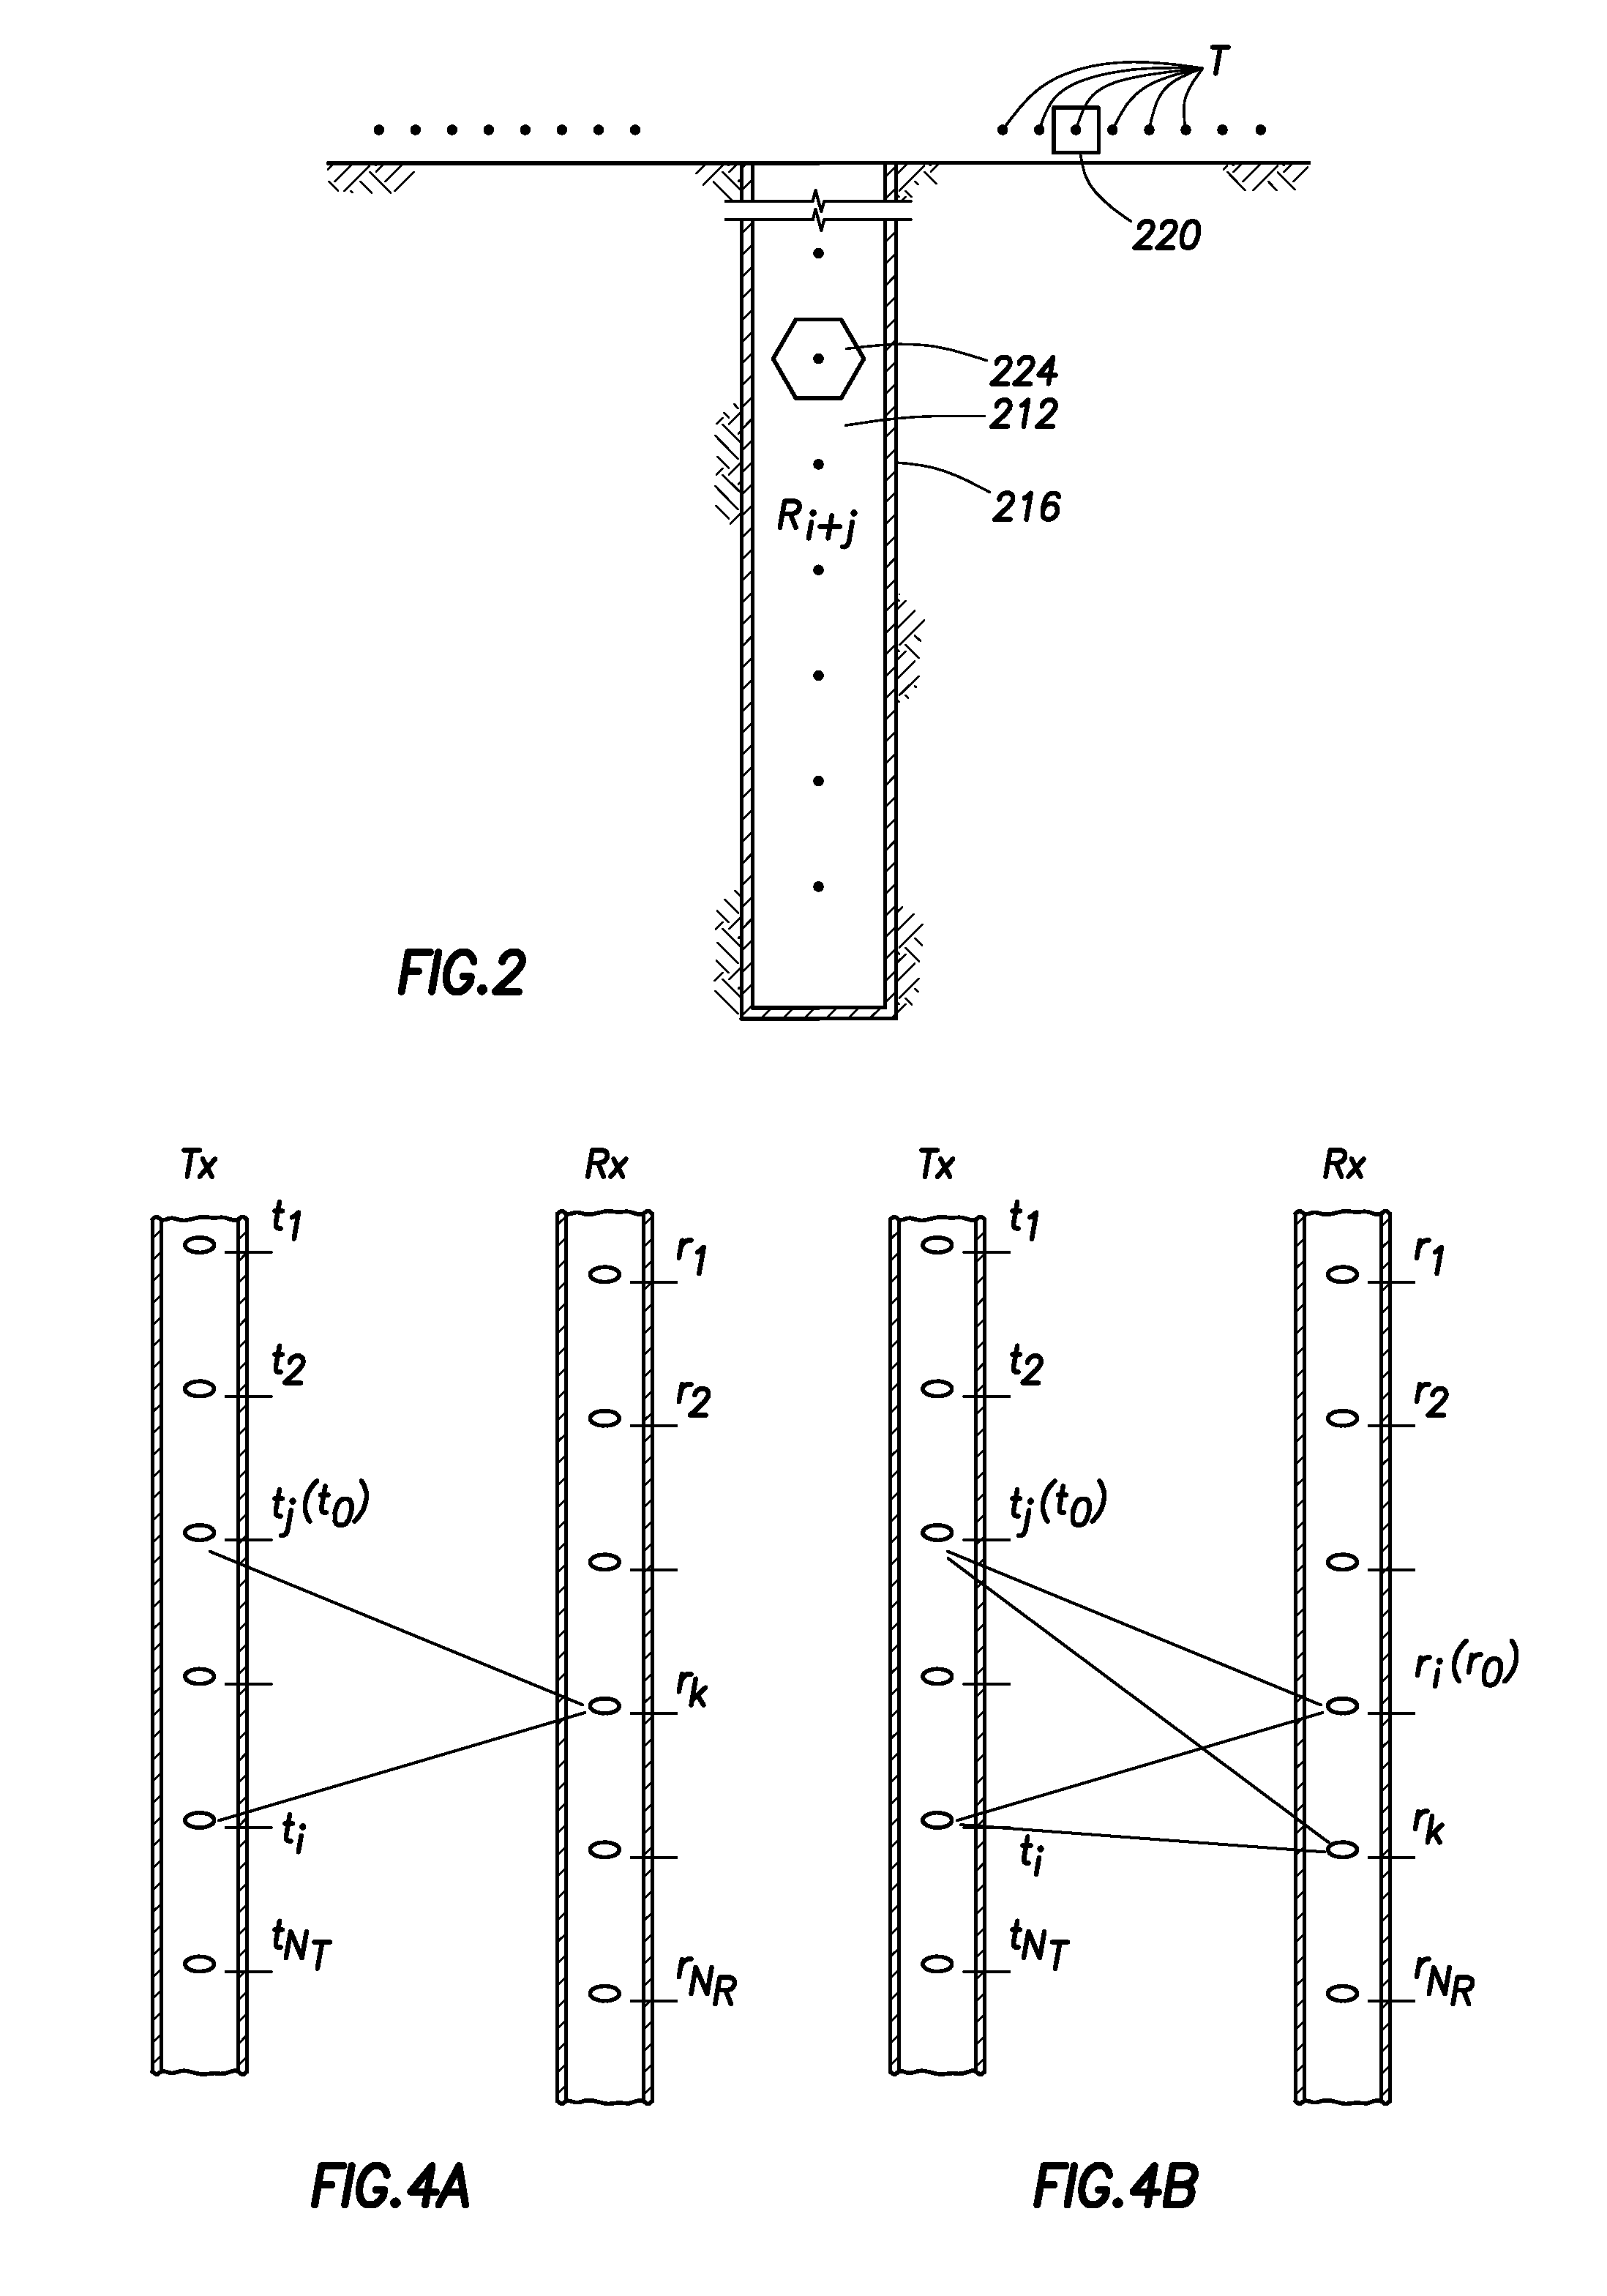 Method and System for Removing Effects of Conductive Casings and Wellbore and Surface Heterogeneity in Electromagnetic Imaging Surveys